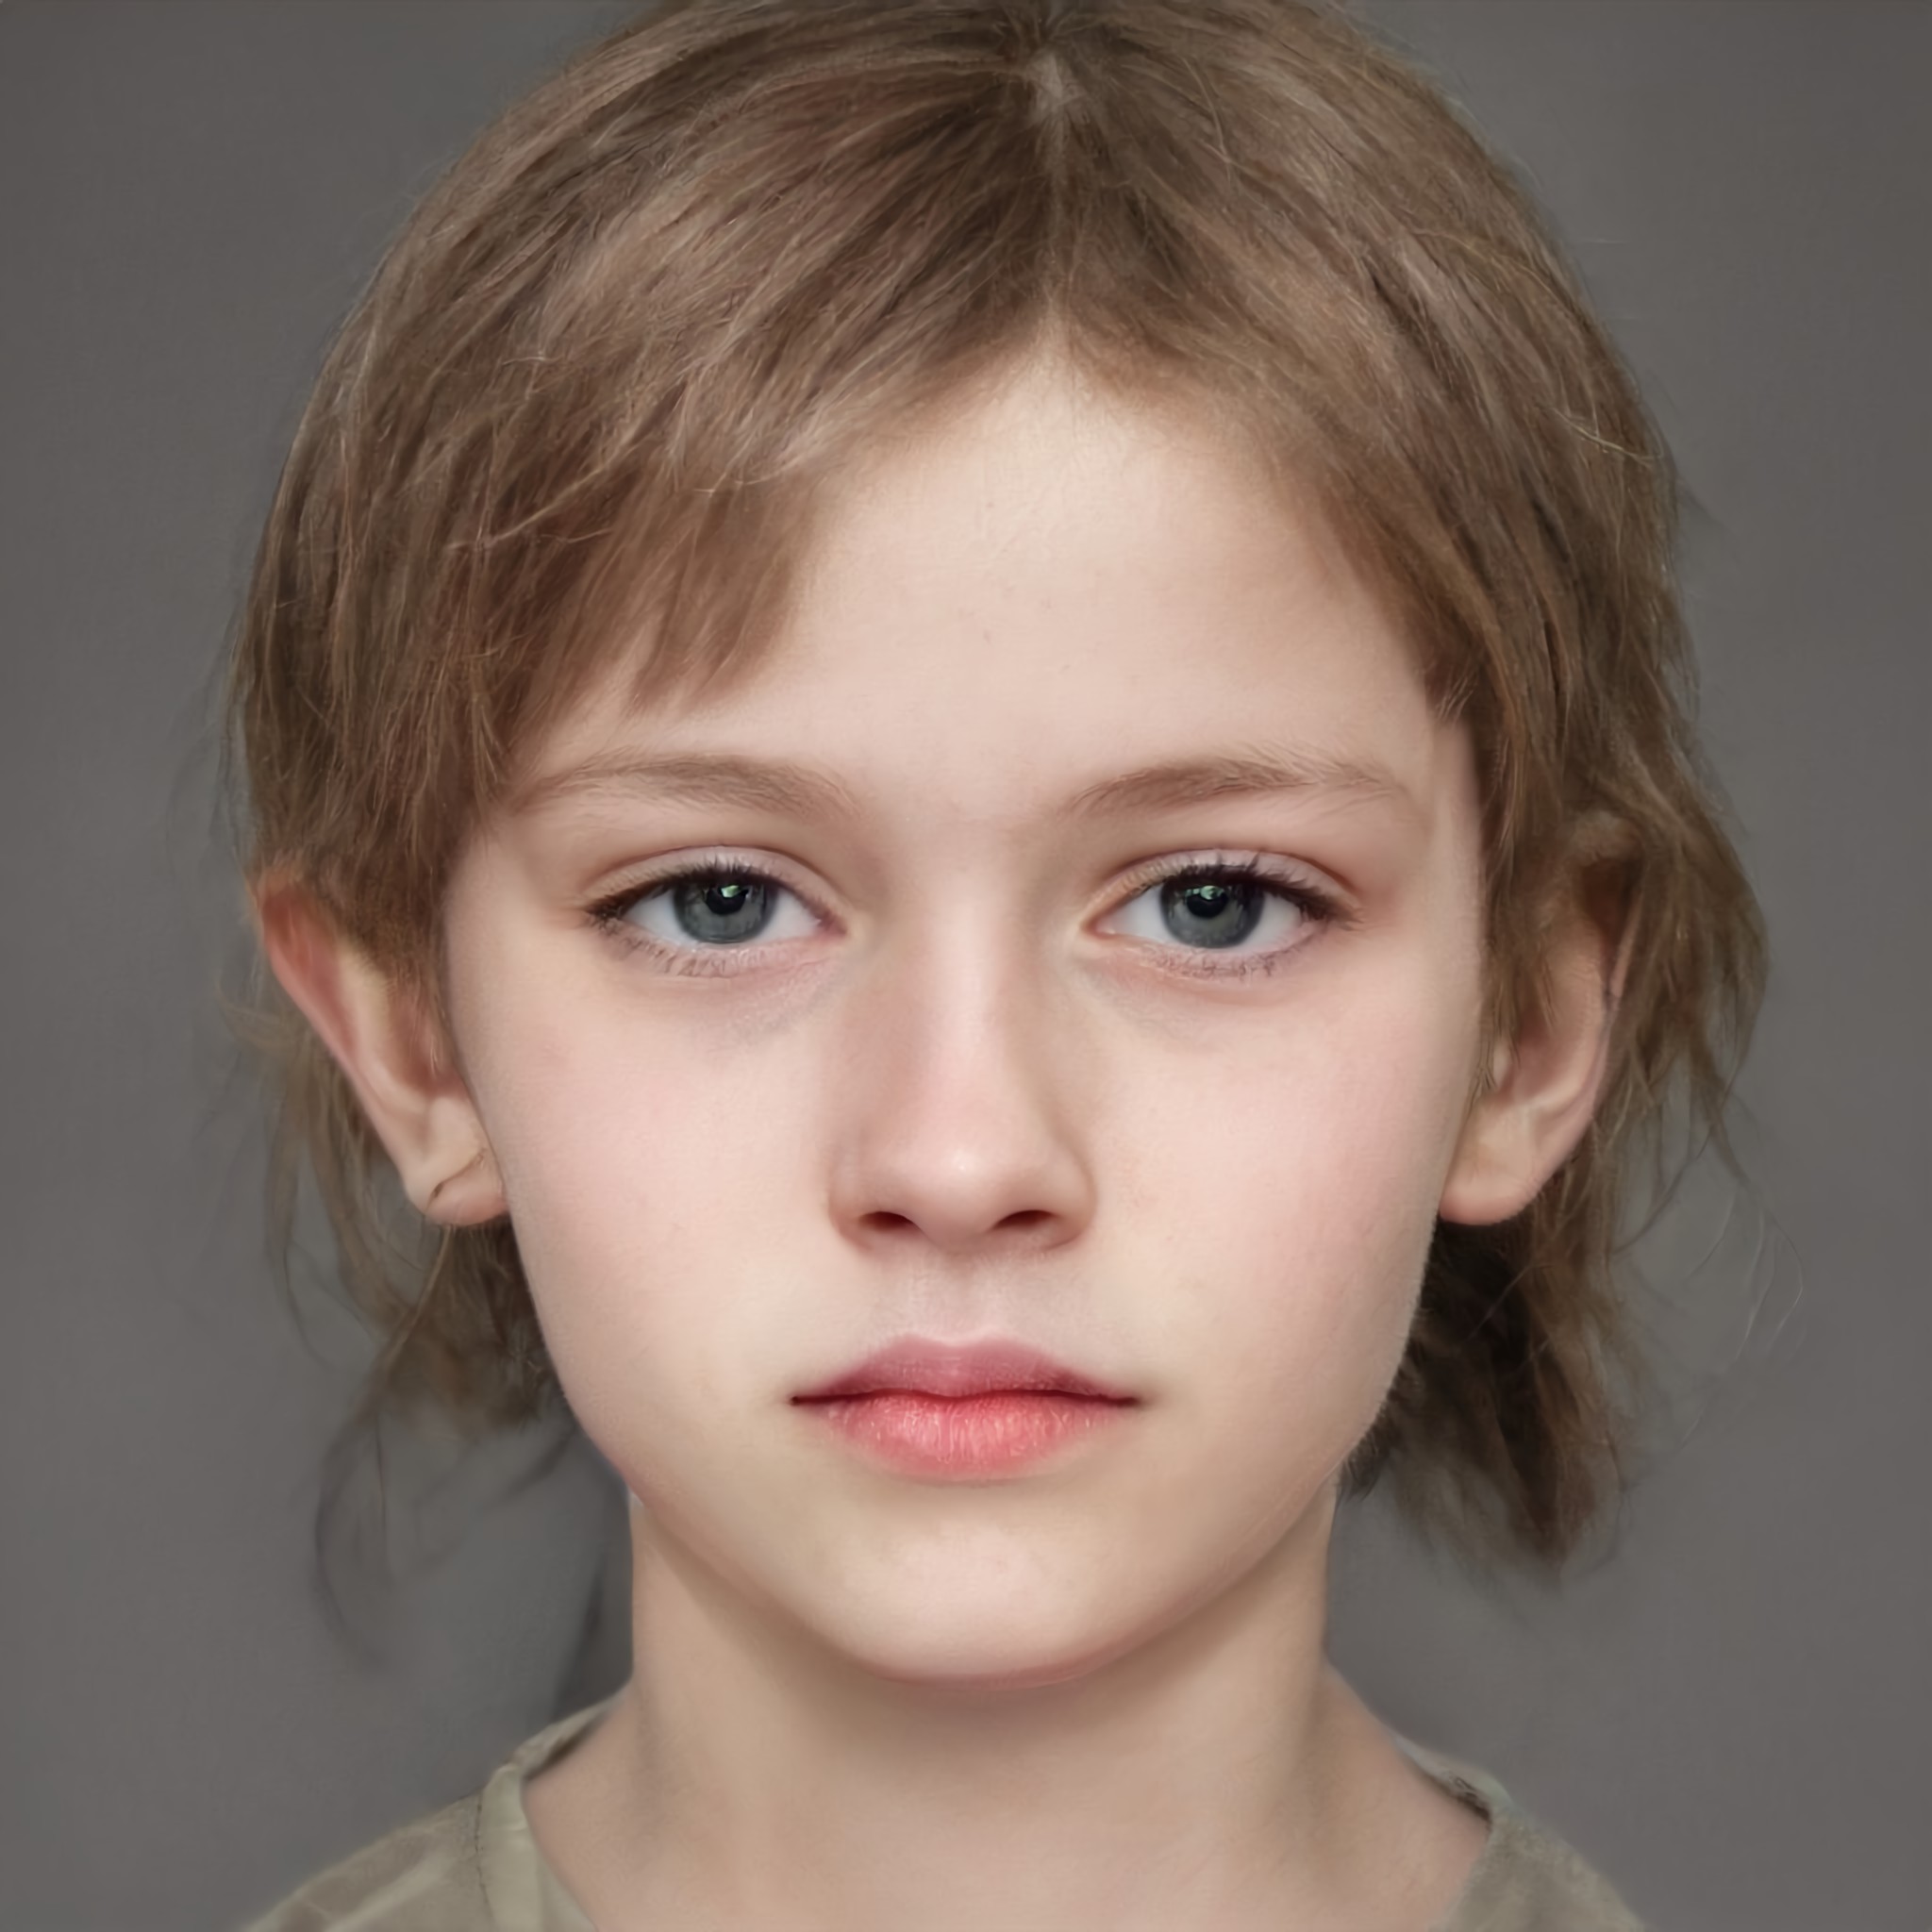 Young caucasian boy with long, light brown hair and gray eyes, bears strong physical resemblance to Eve